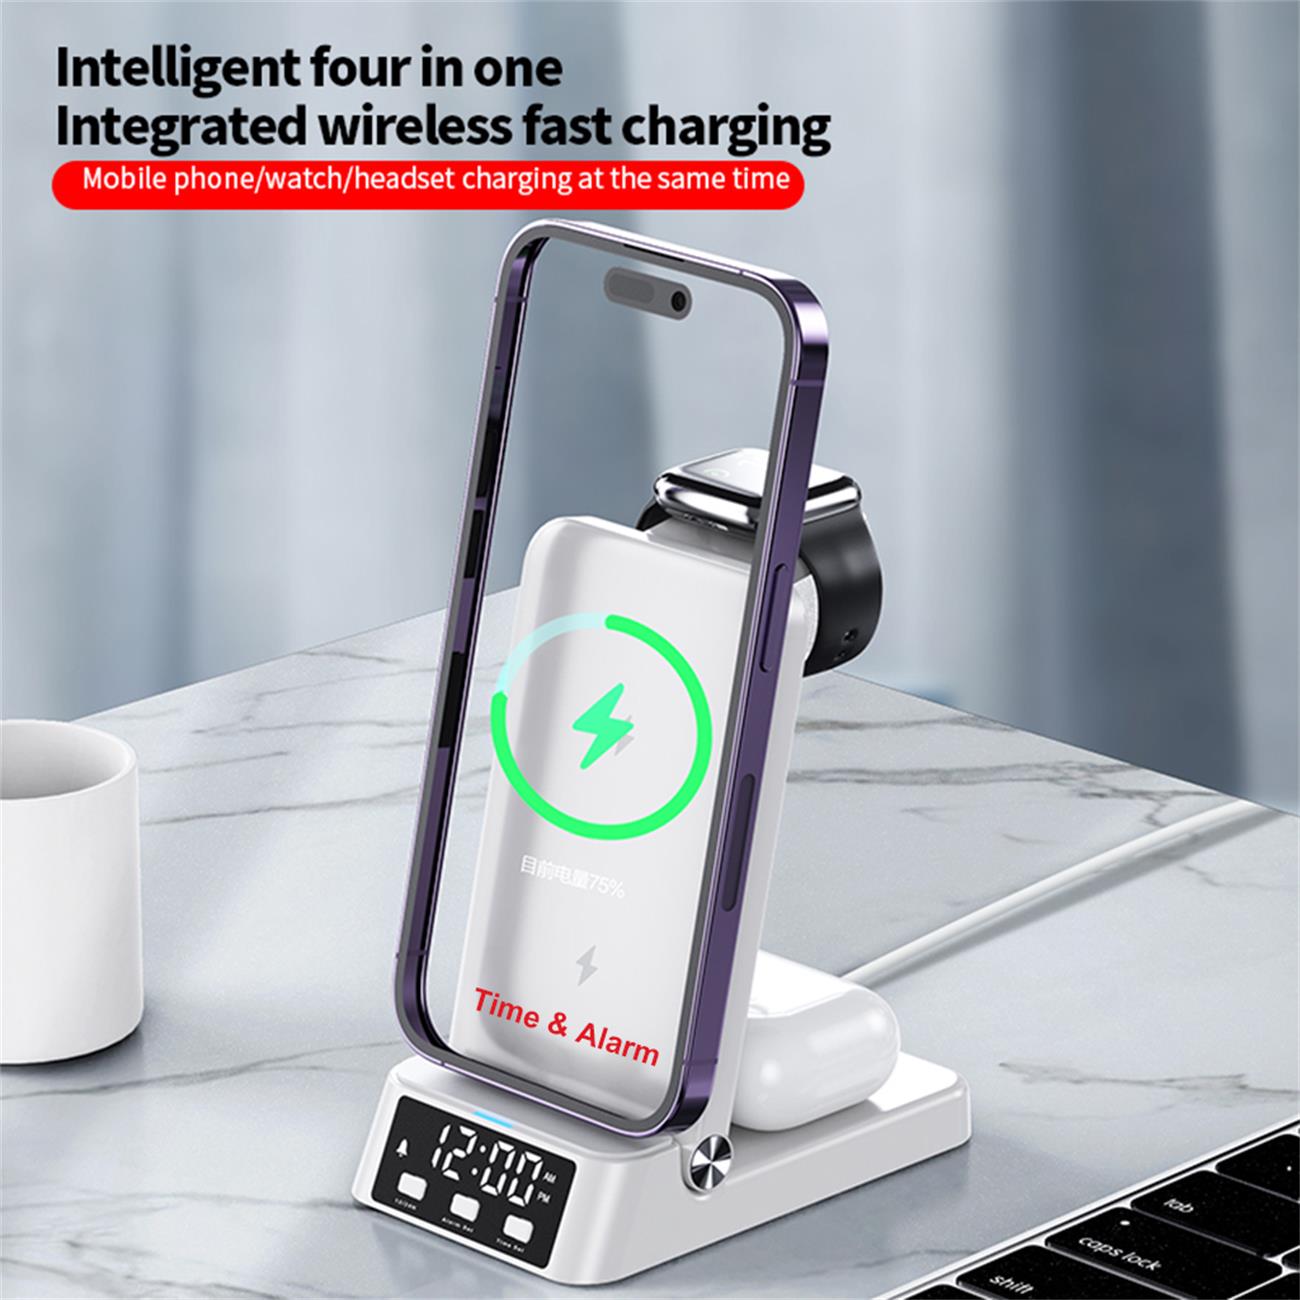 Multifunctional Wireless Charger Foldable 4 In 1 With Alarm For Smart Phone Watch Earphone